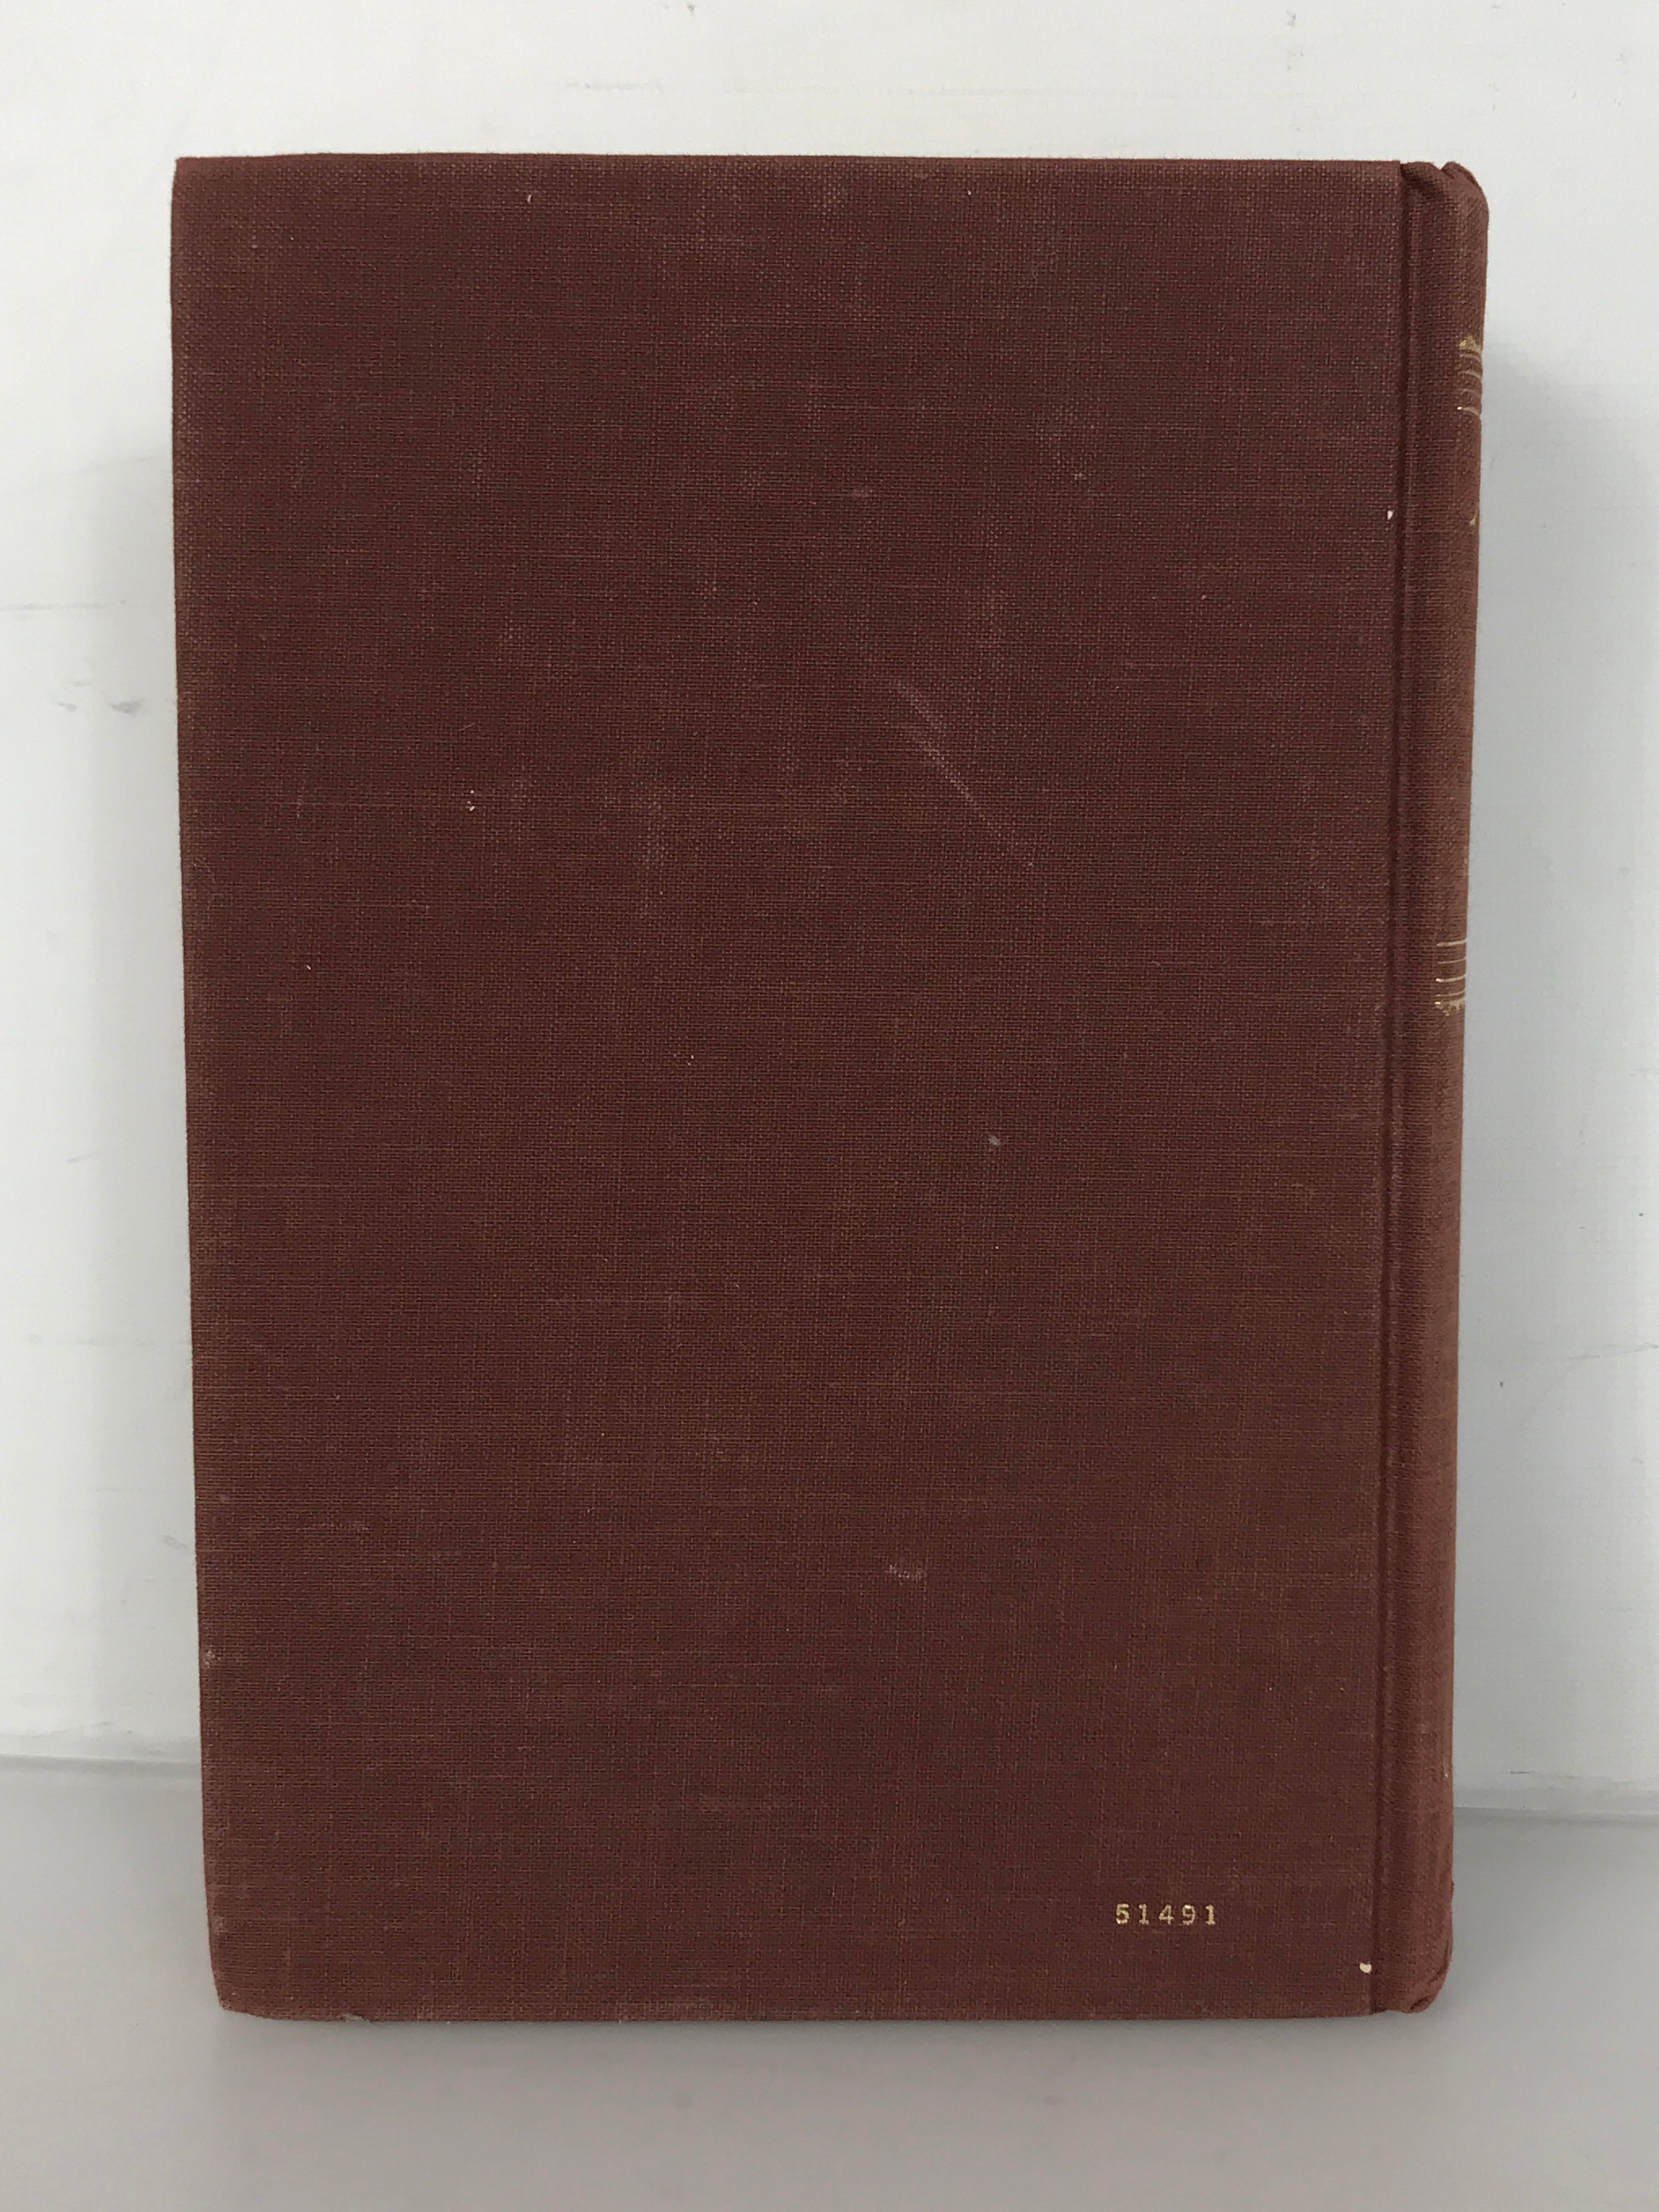 American Dawn A New Model of American Prehistory by Louis A. Brennan First Printing 1970 HC